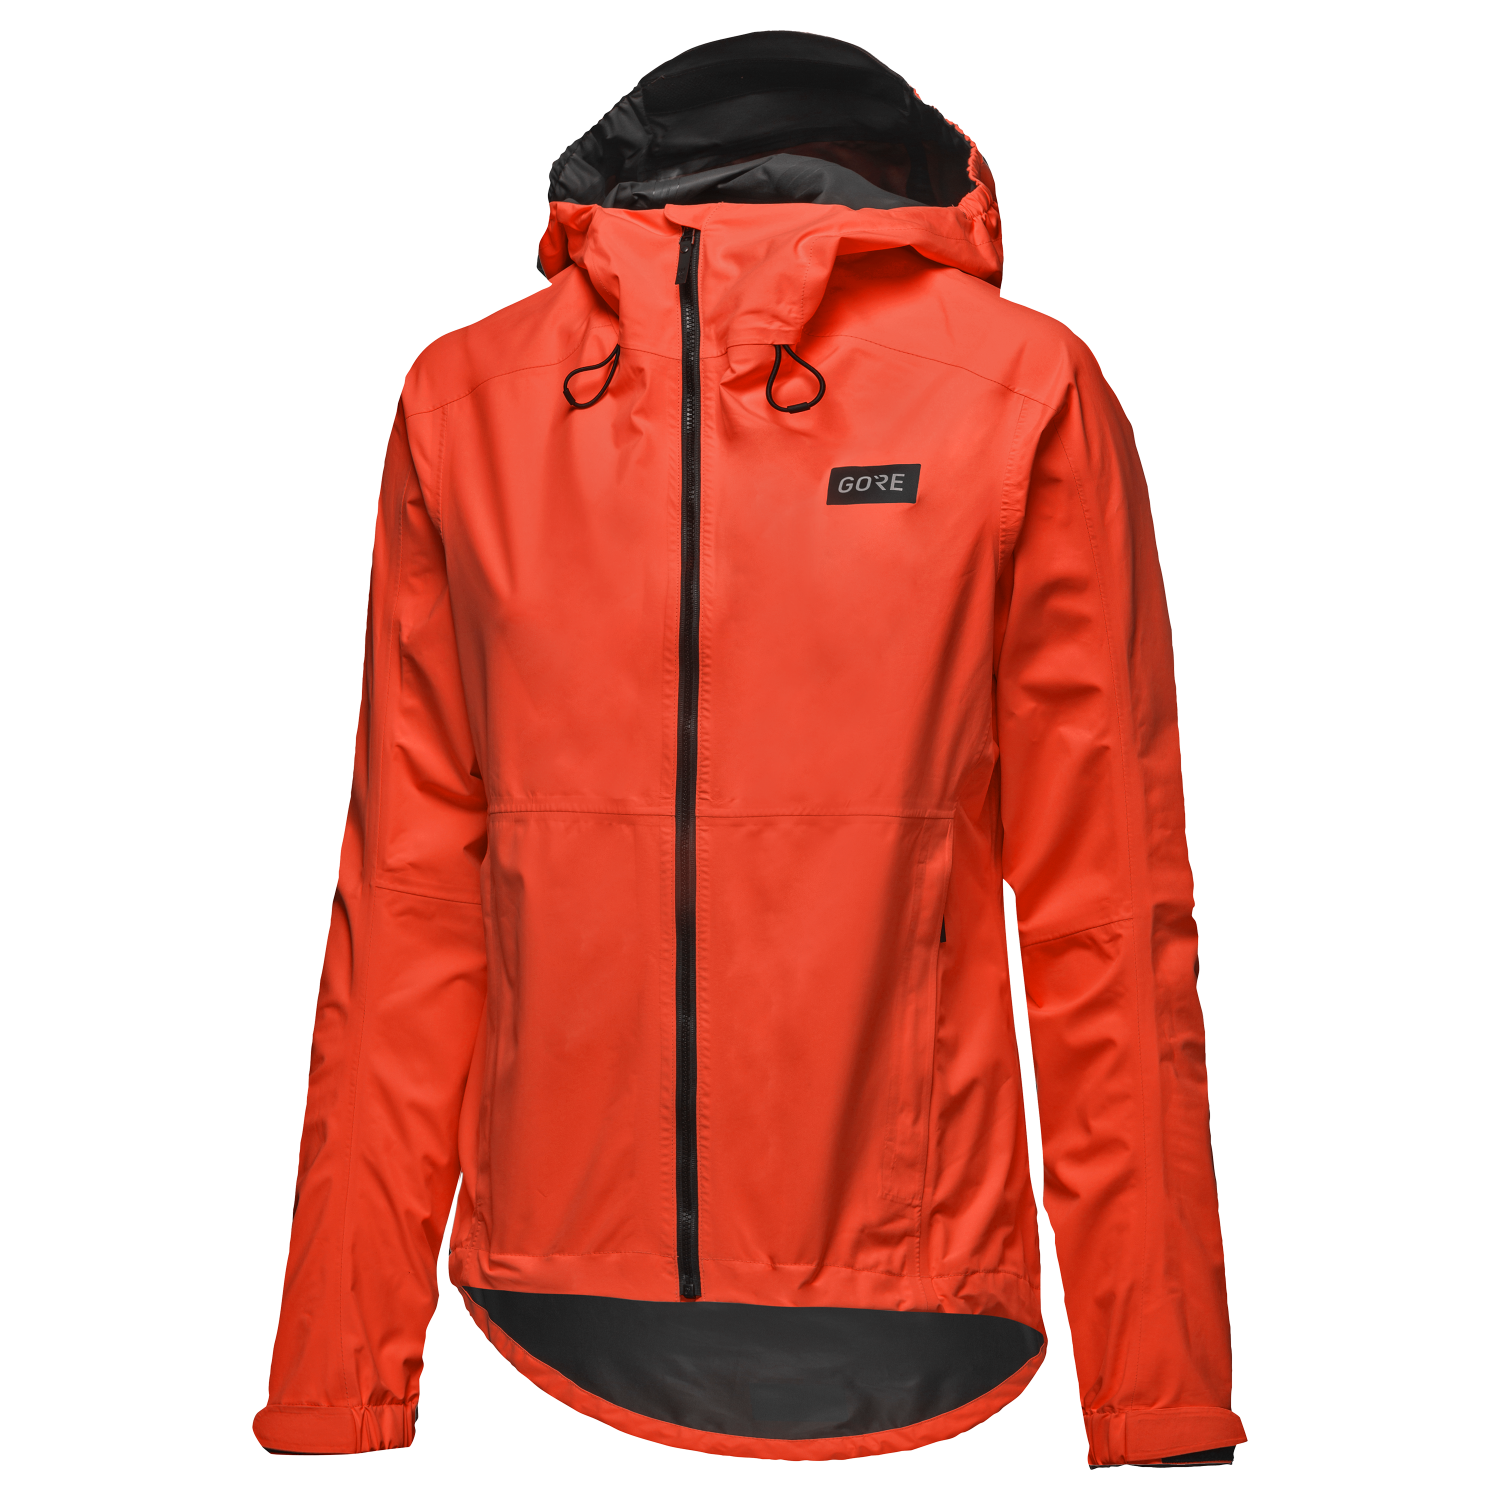 GOREWEAR releases 'Made to Last' MTB collection, includes women's Endure  Jacket, much more - Bikerumor